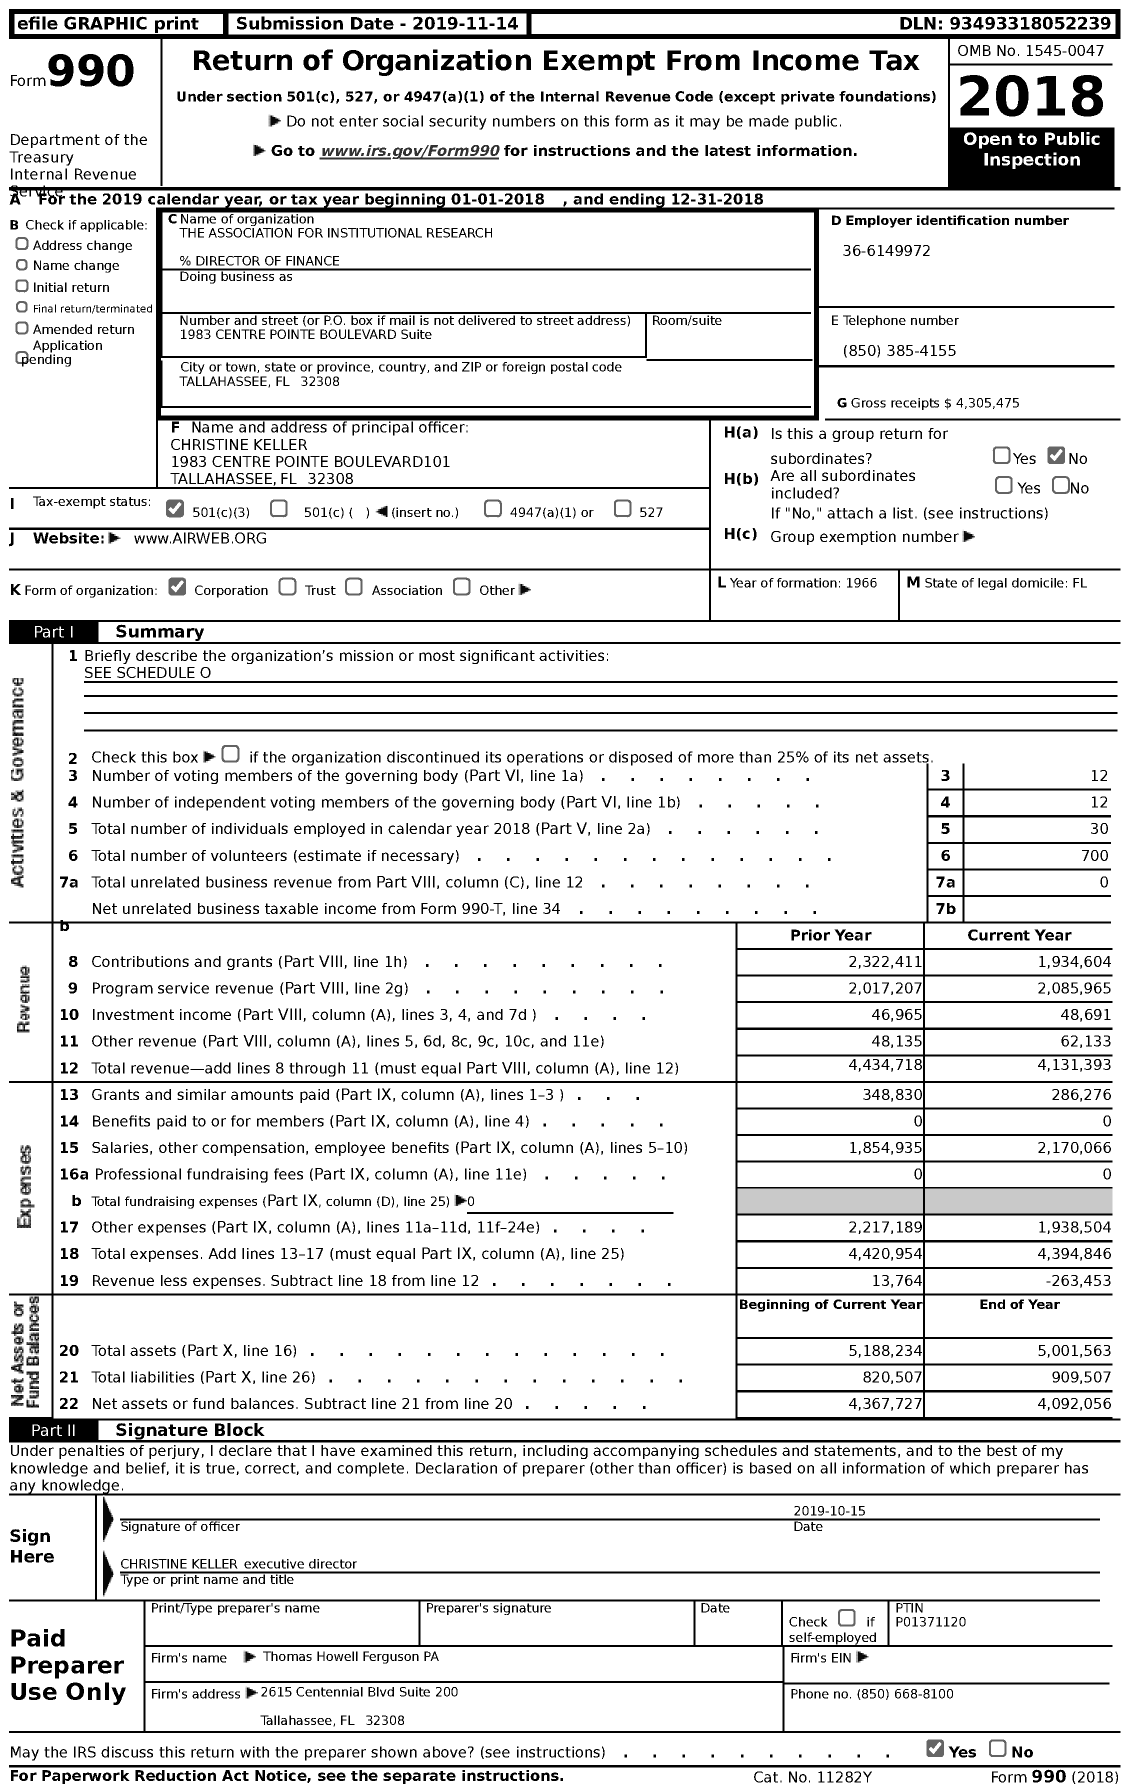 Image of first page of 2018 Form 990 for The Association for Institutional Research